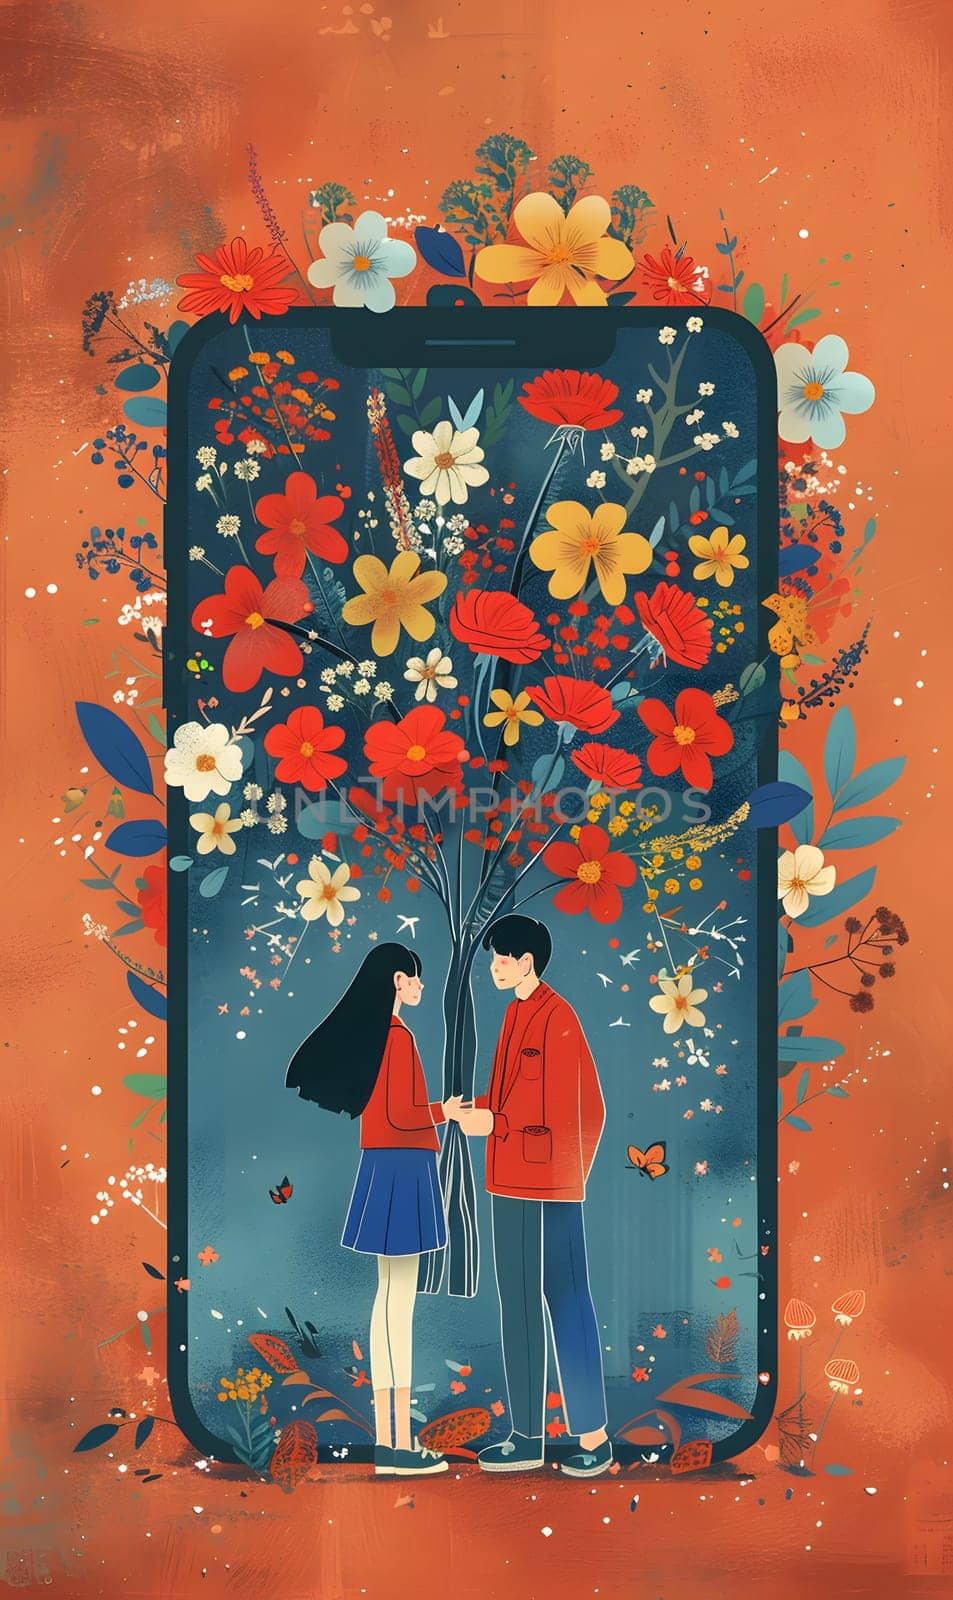 A man and a woman stand in front of a floral phone the creative arts piece features orange flowers bursting from a rectangle window, blending art and technology